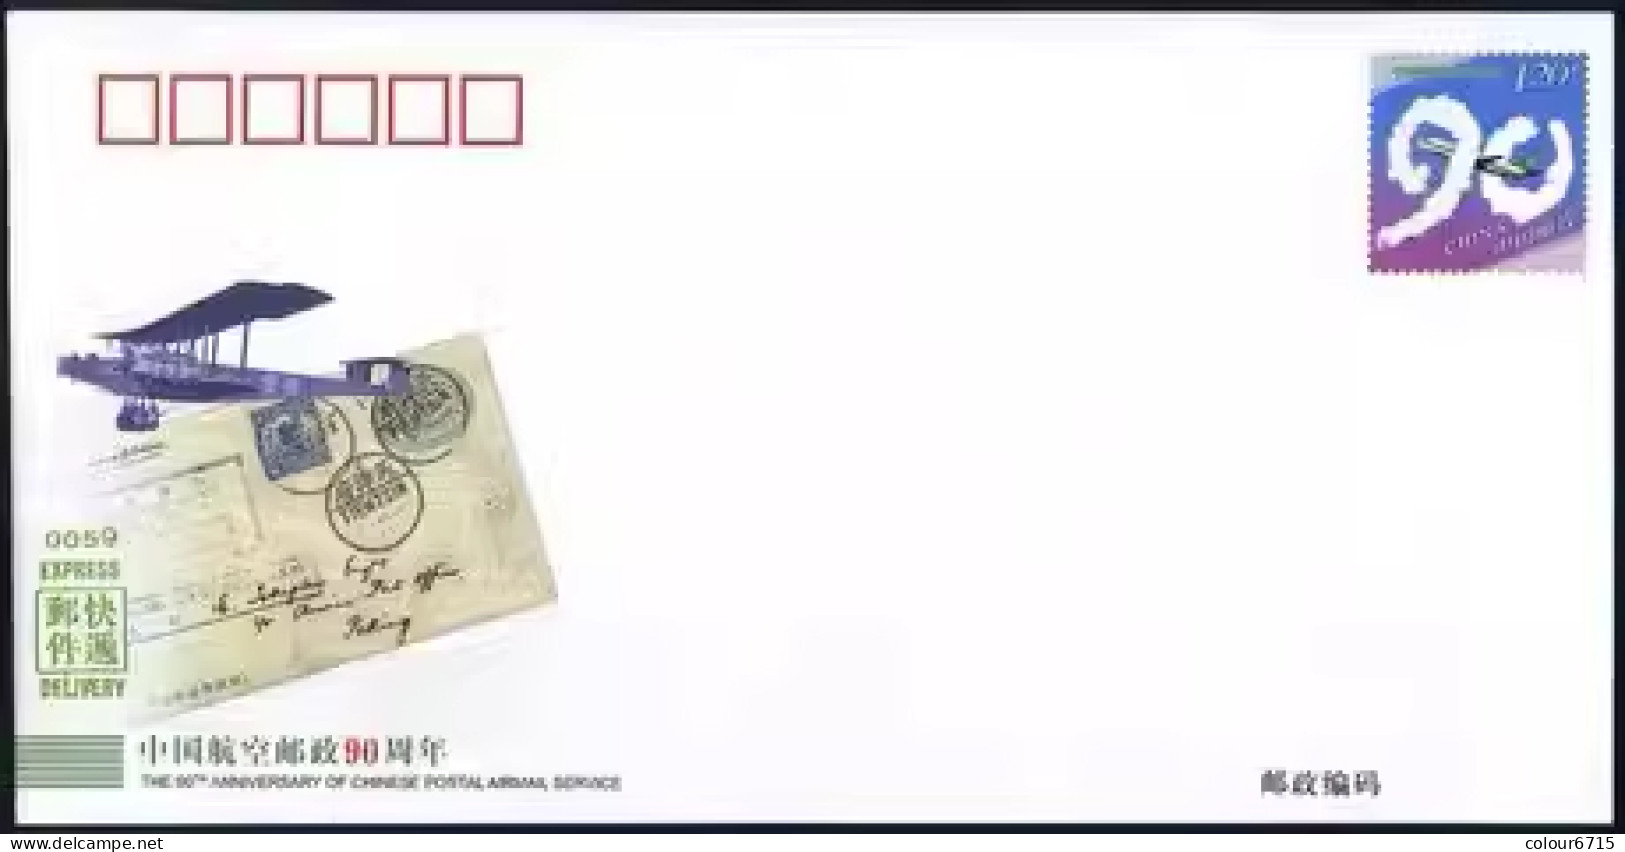 China Postal Cover 2010/JF94 The 90th Anniversary Of Chinese Postal Airmail Service 1v MNH - Sobres